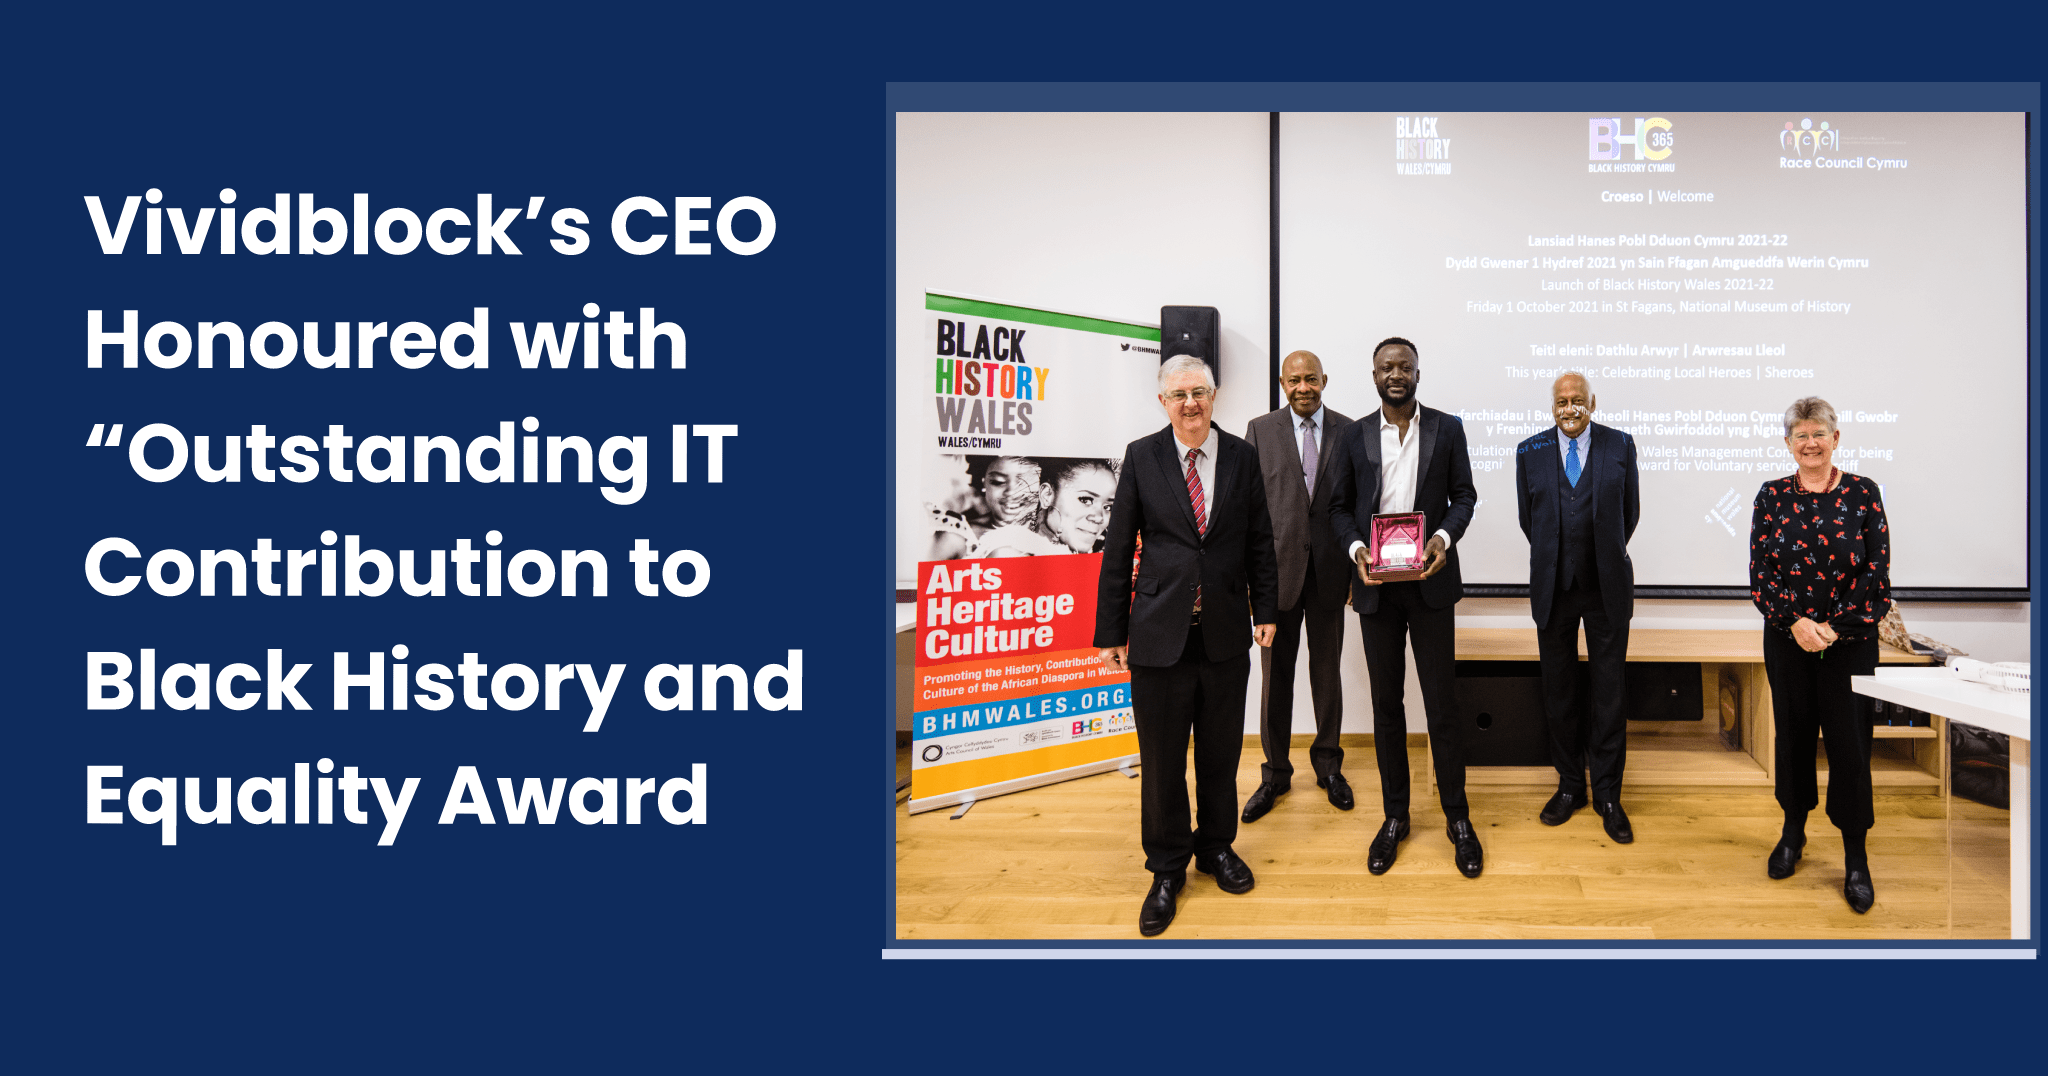 vividblock ceo honoured with outstanding it contribution to black history and equality award